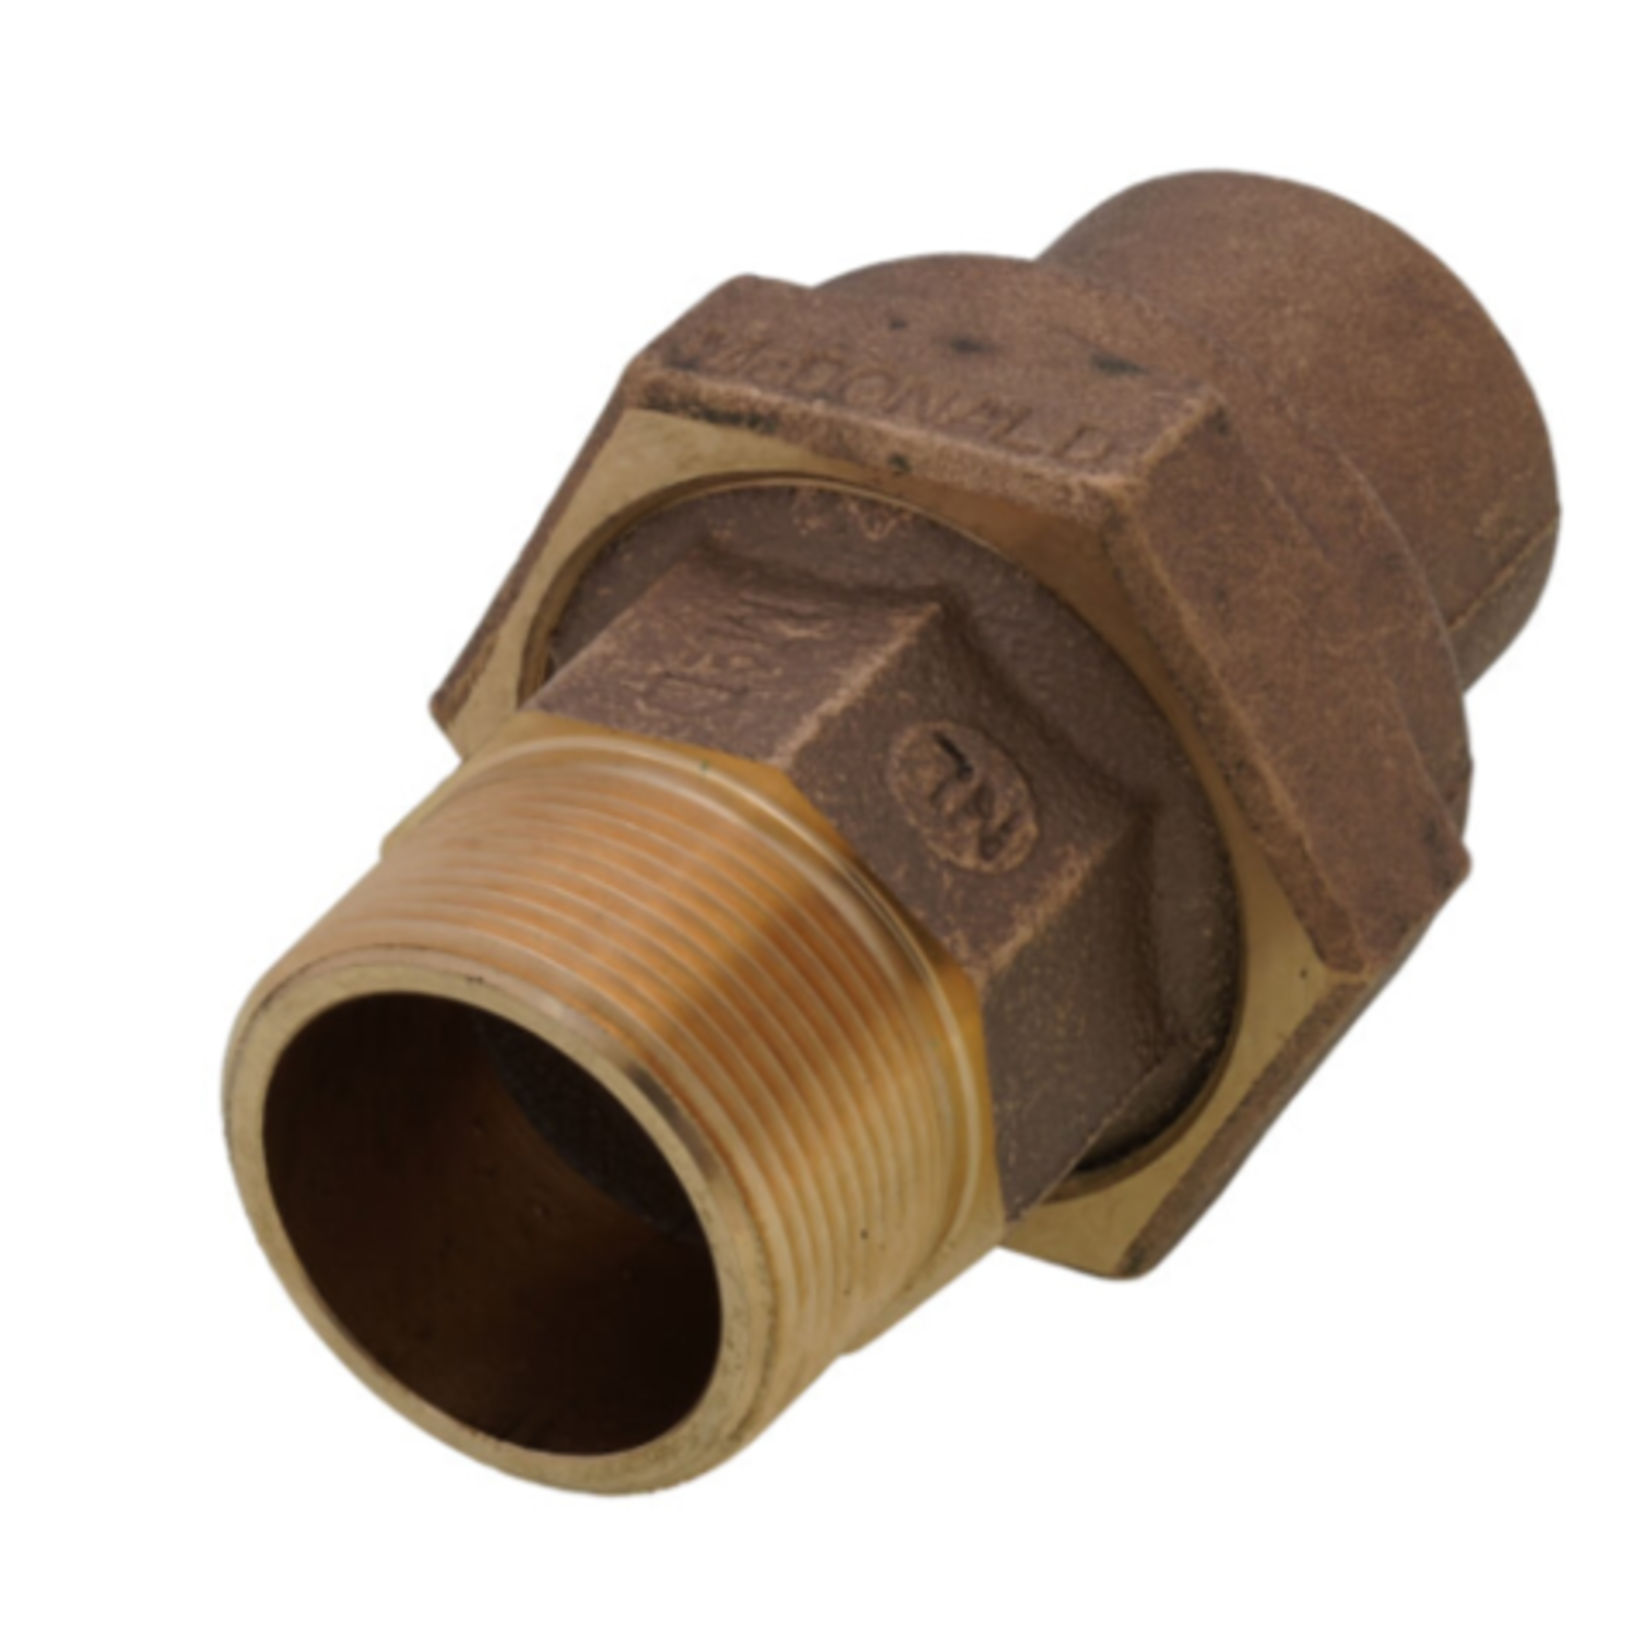 LEGEND VALVE 1 1/2 IN FLARE X MIP NO LEAD BRONZE ADAPTER COUPLING (FLARE X MALE)